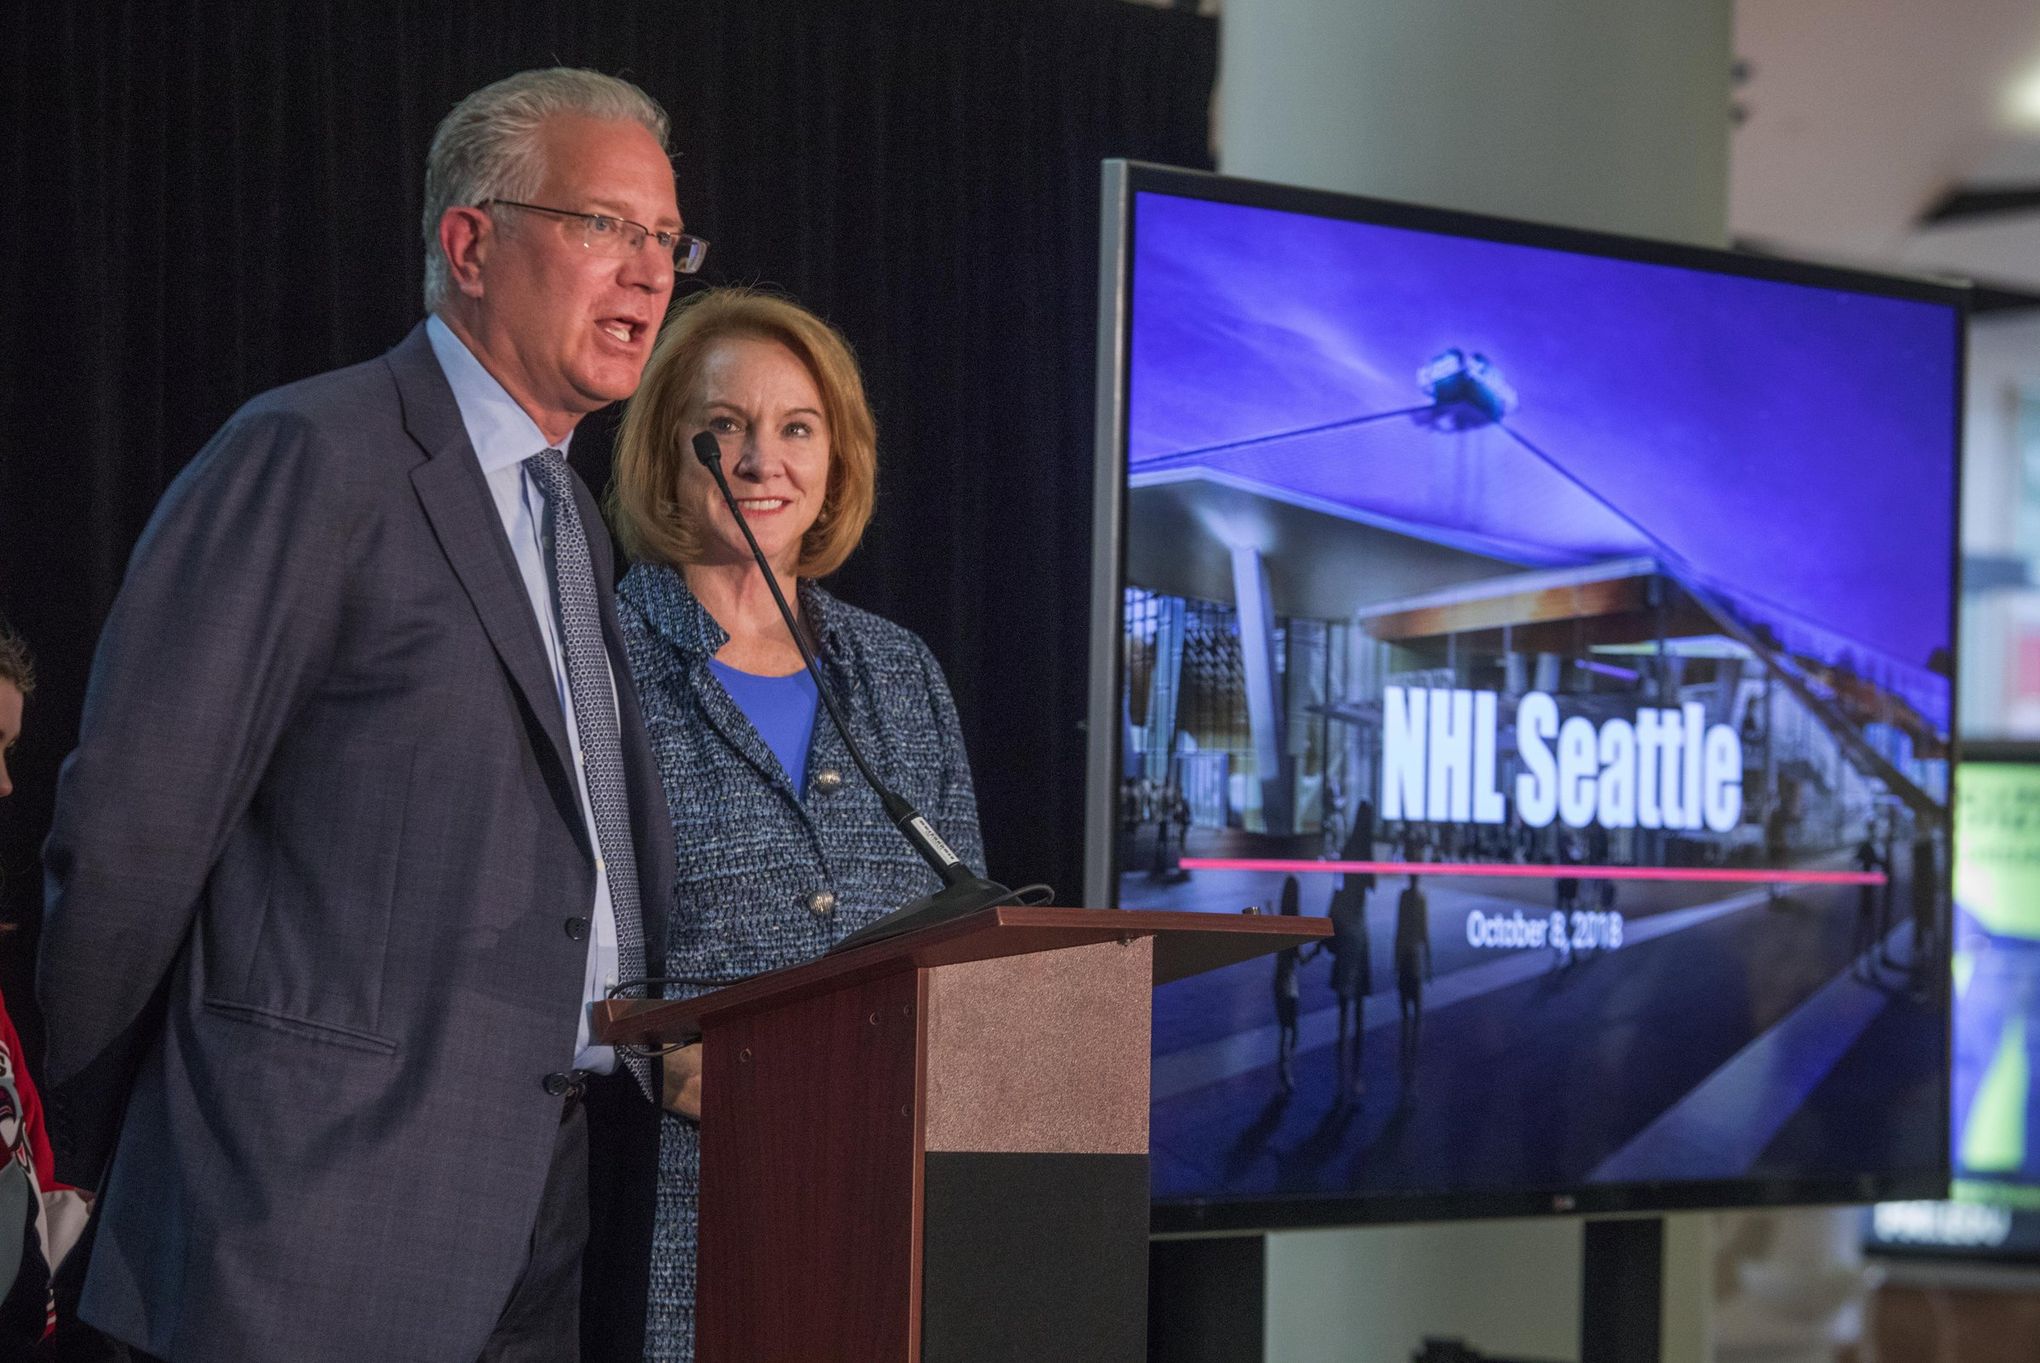 Seattle's future hockey hub? Inside the big money — and community — of NHL  practice facilities